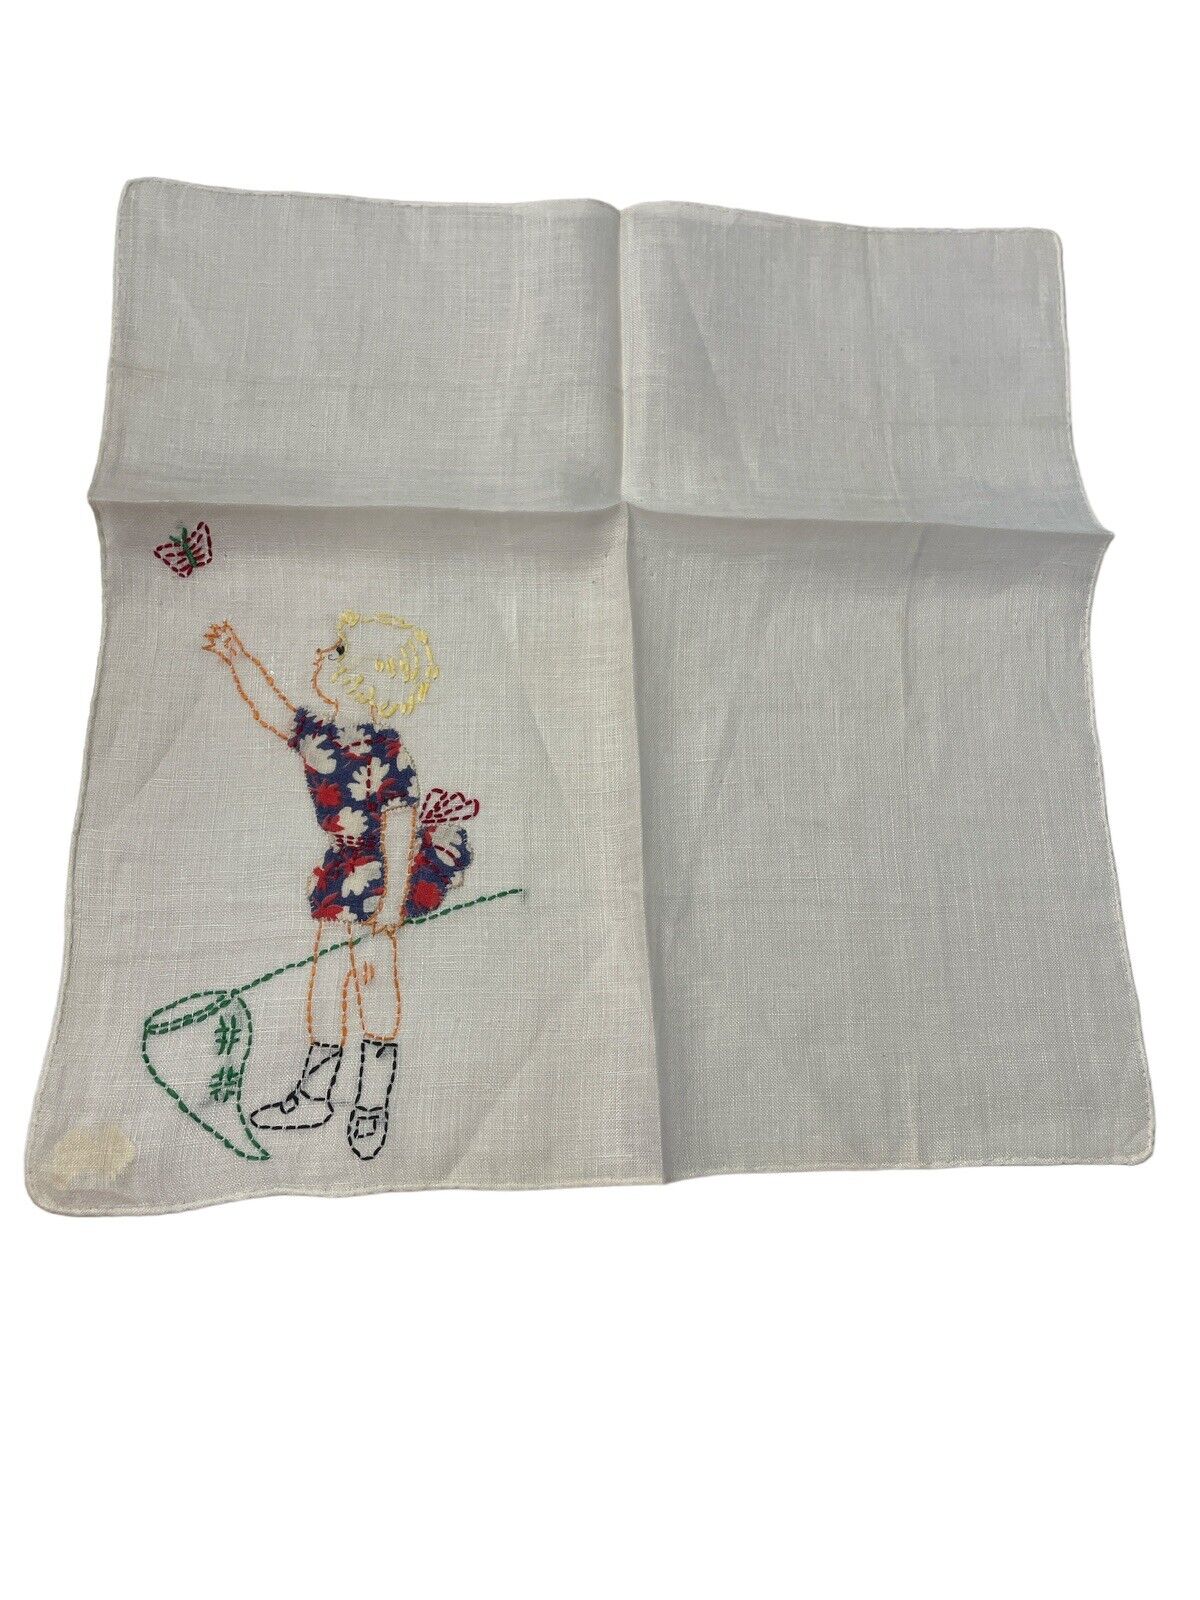 Vintage White Linen Embroidered Girl chases Butterfly Handkerchief 9\